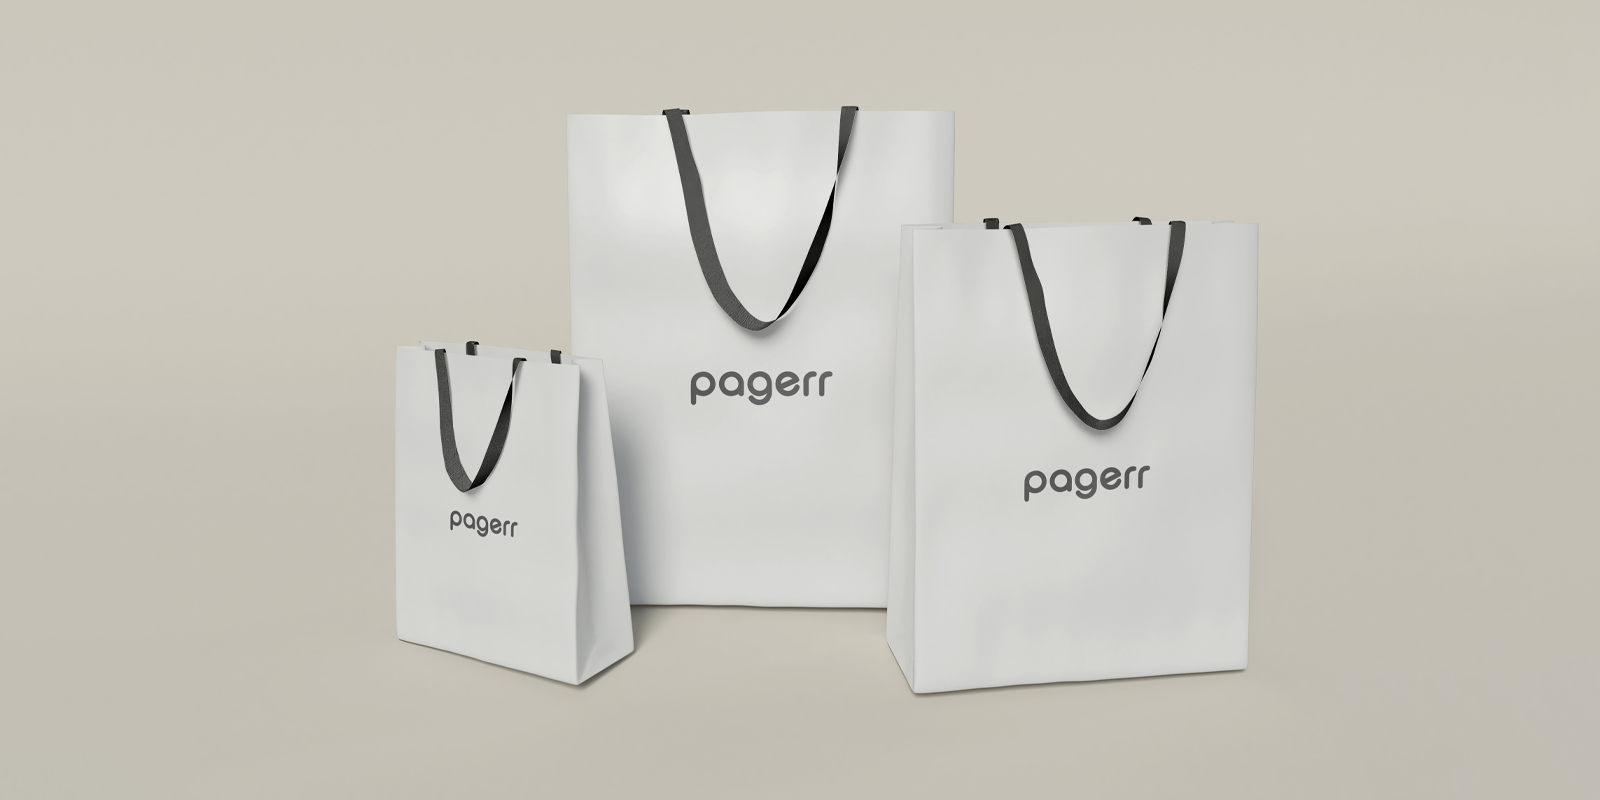 Shopping bags in Newcastle - Print with Pagerr